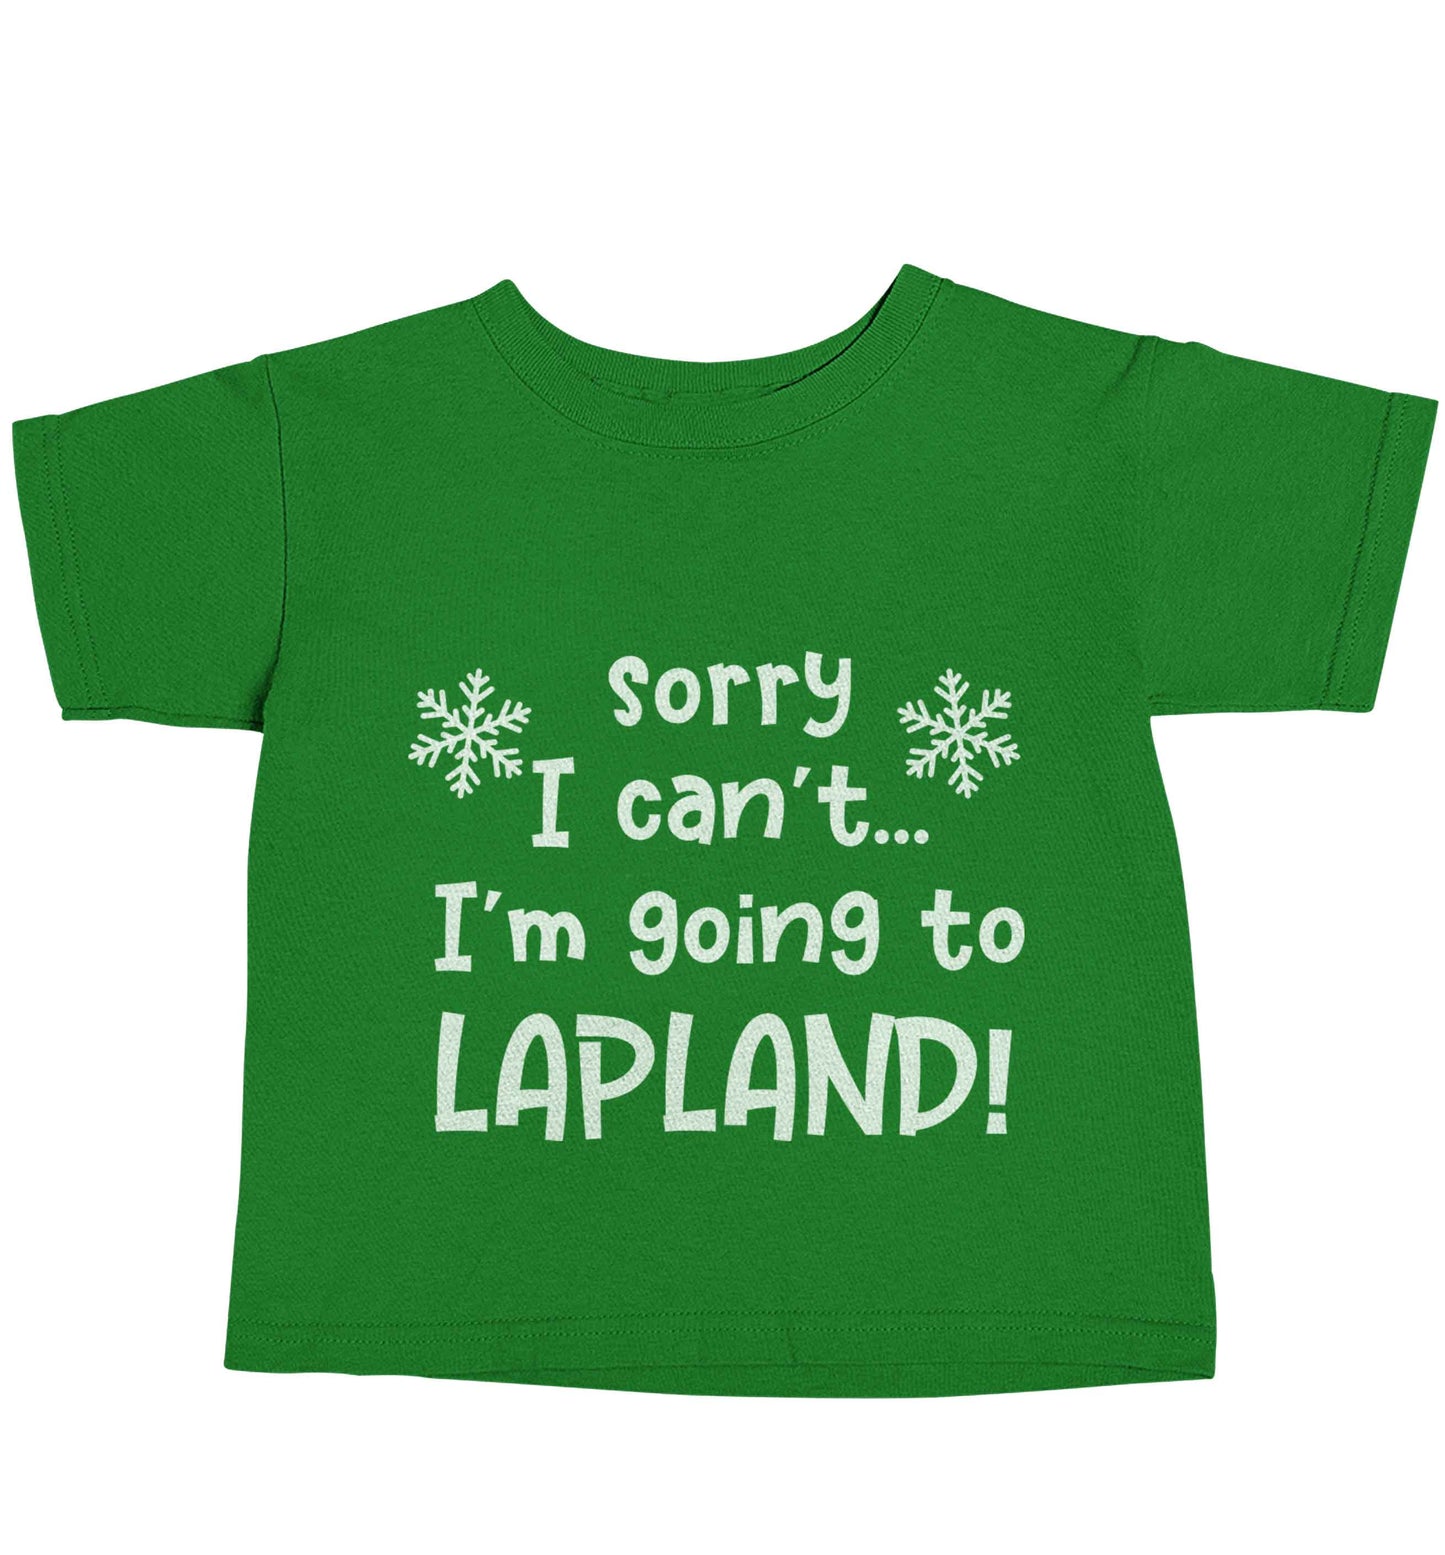 Sorry I can't I'm going to Lapland green baby toddler Tshirt 2 Years